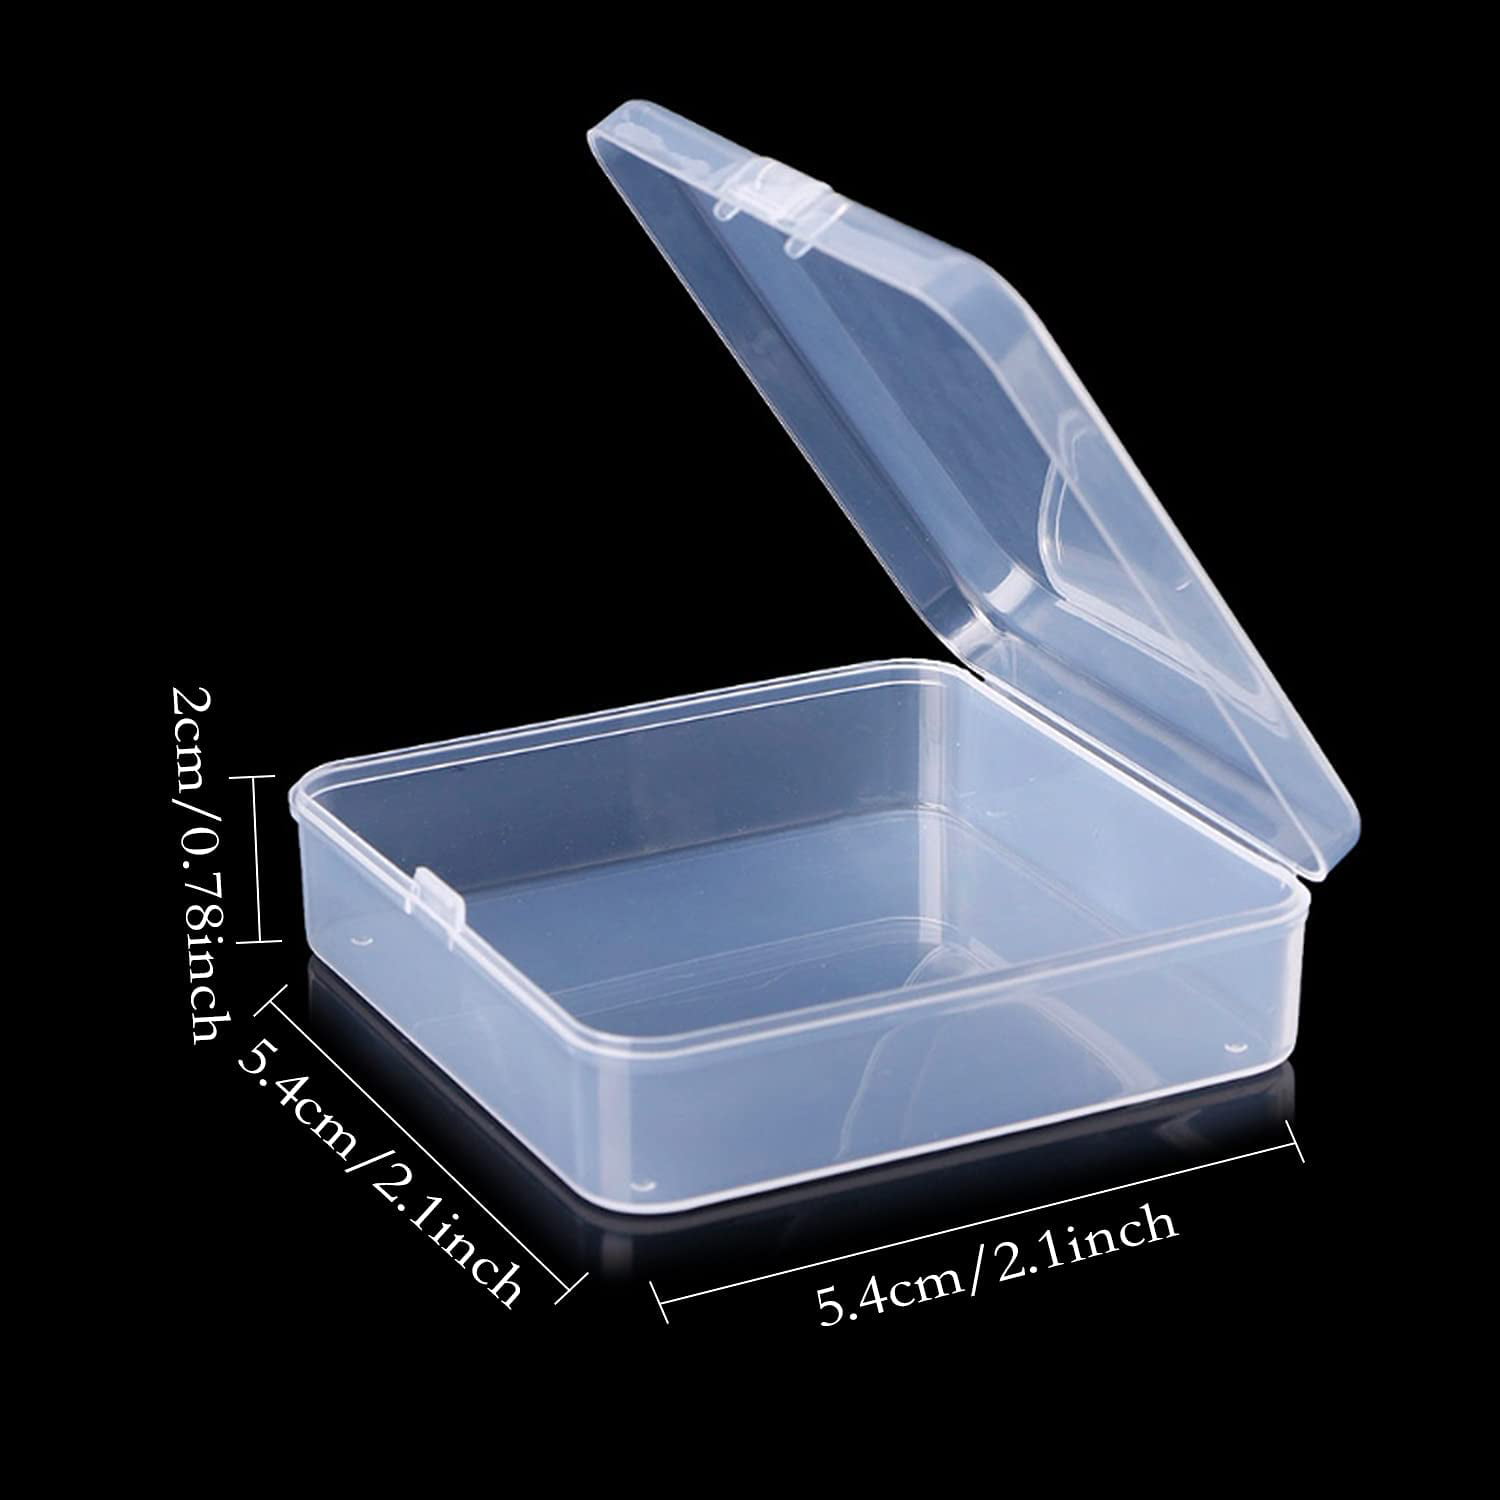 Small Items Crafts 2.9 x 2.9 x1Inches Jewelry Hardware 24 Pack Small Clear Plastic Storage Containers with Lids,Beads Storage Box with Hinged Lid for Beads,Earplugs,Pins 